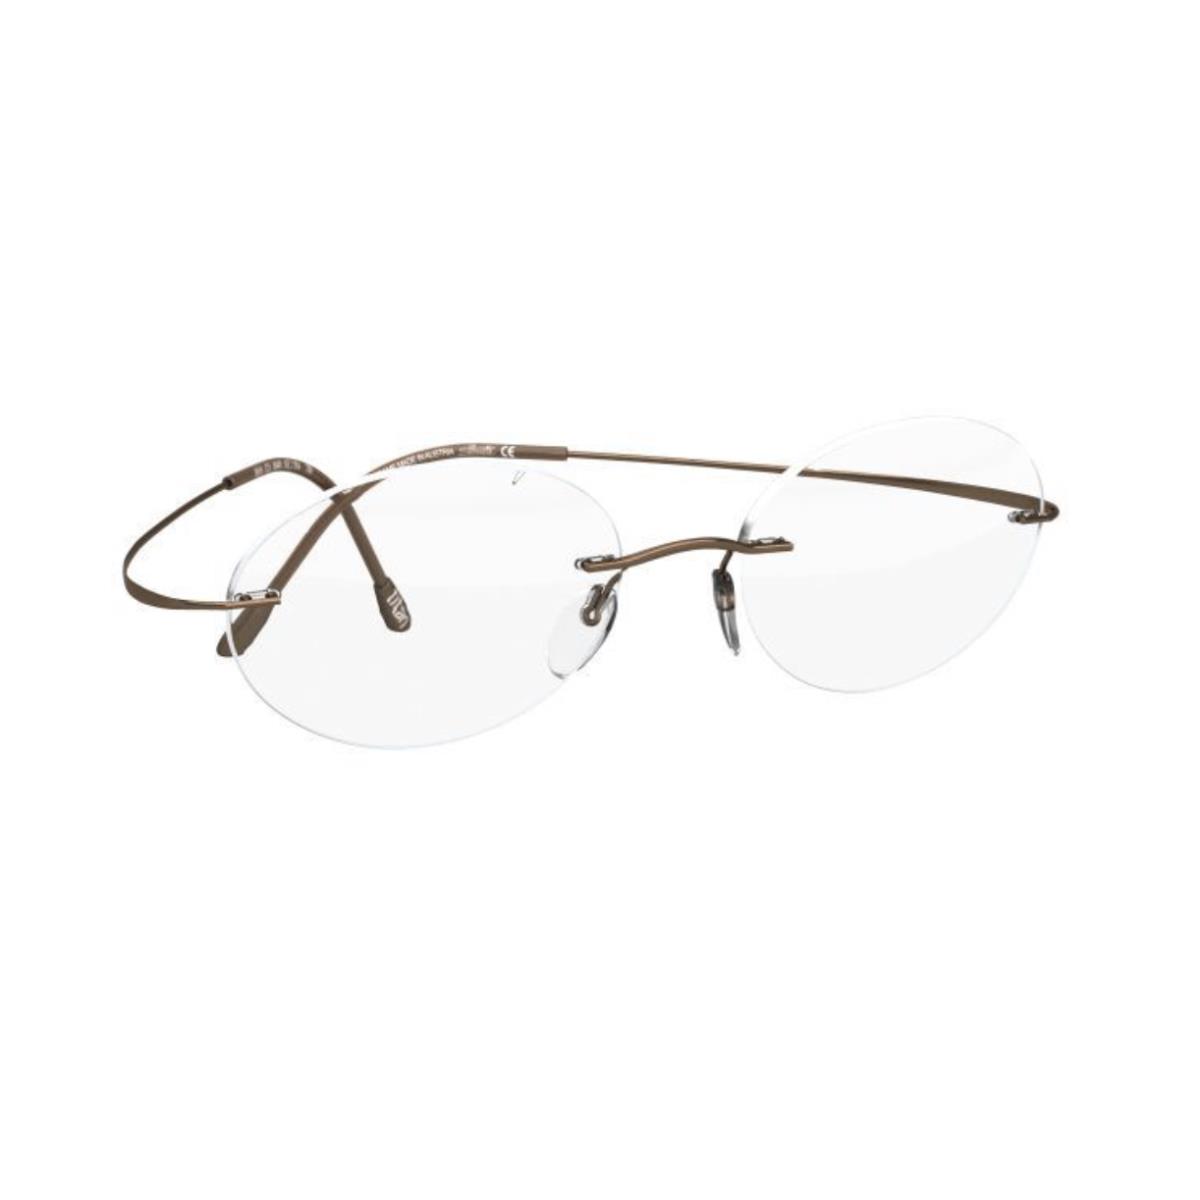 Silhouette Rimless Eyeglasses Titan Minimal Art The Must Collection Frames PINECONE - 6040, SIZE: 51-19 150, SHAPE - CO